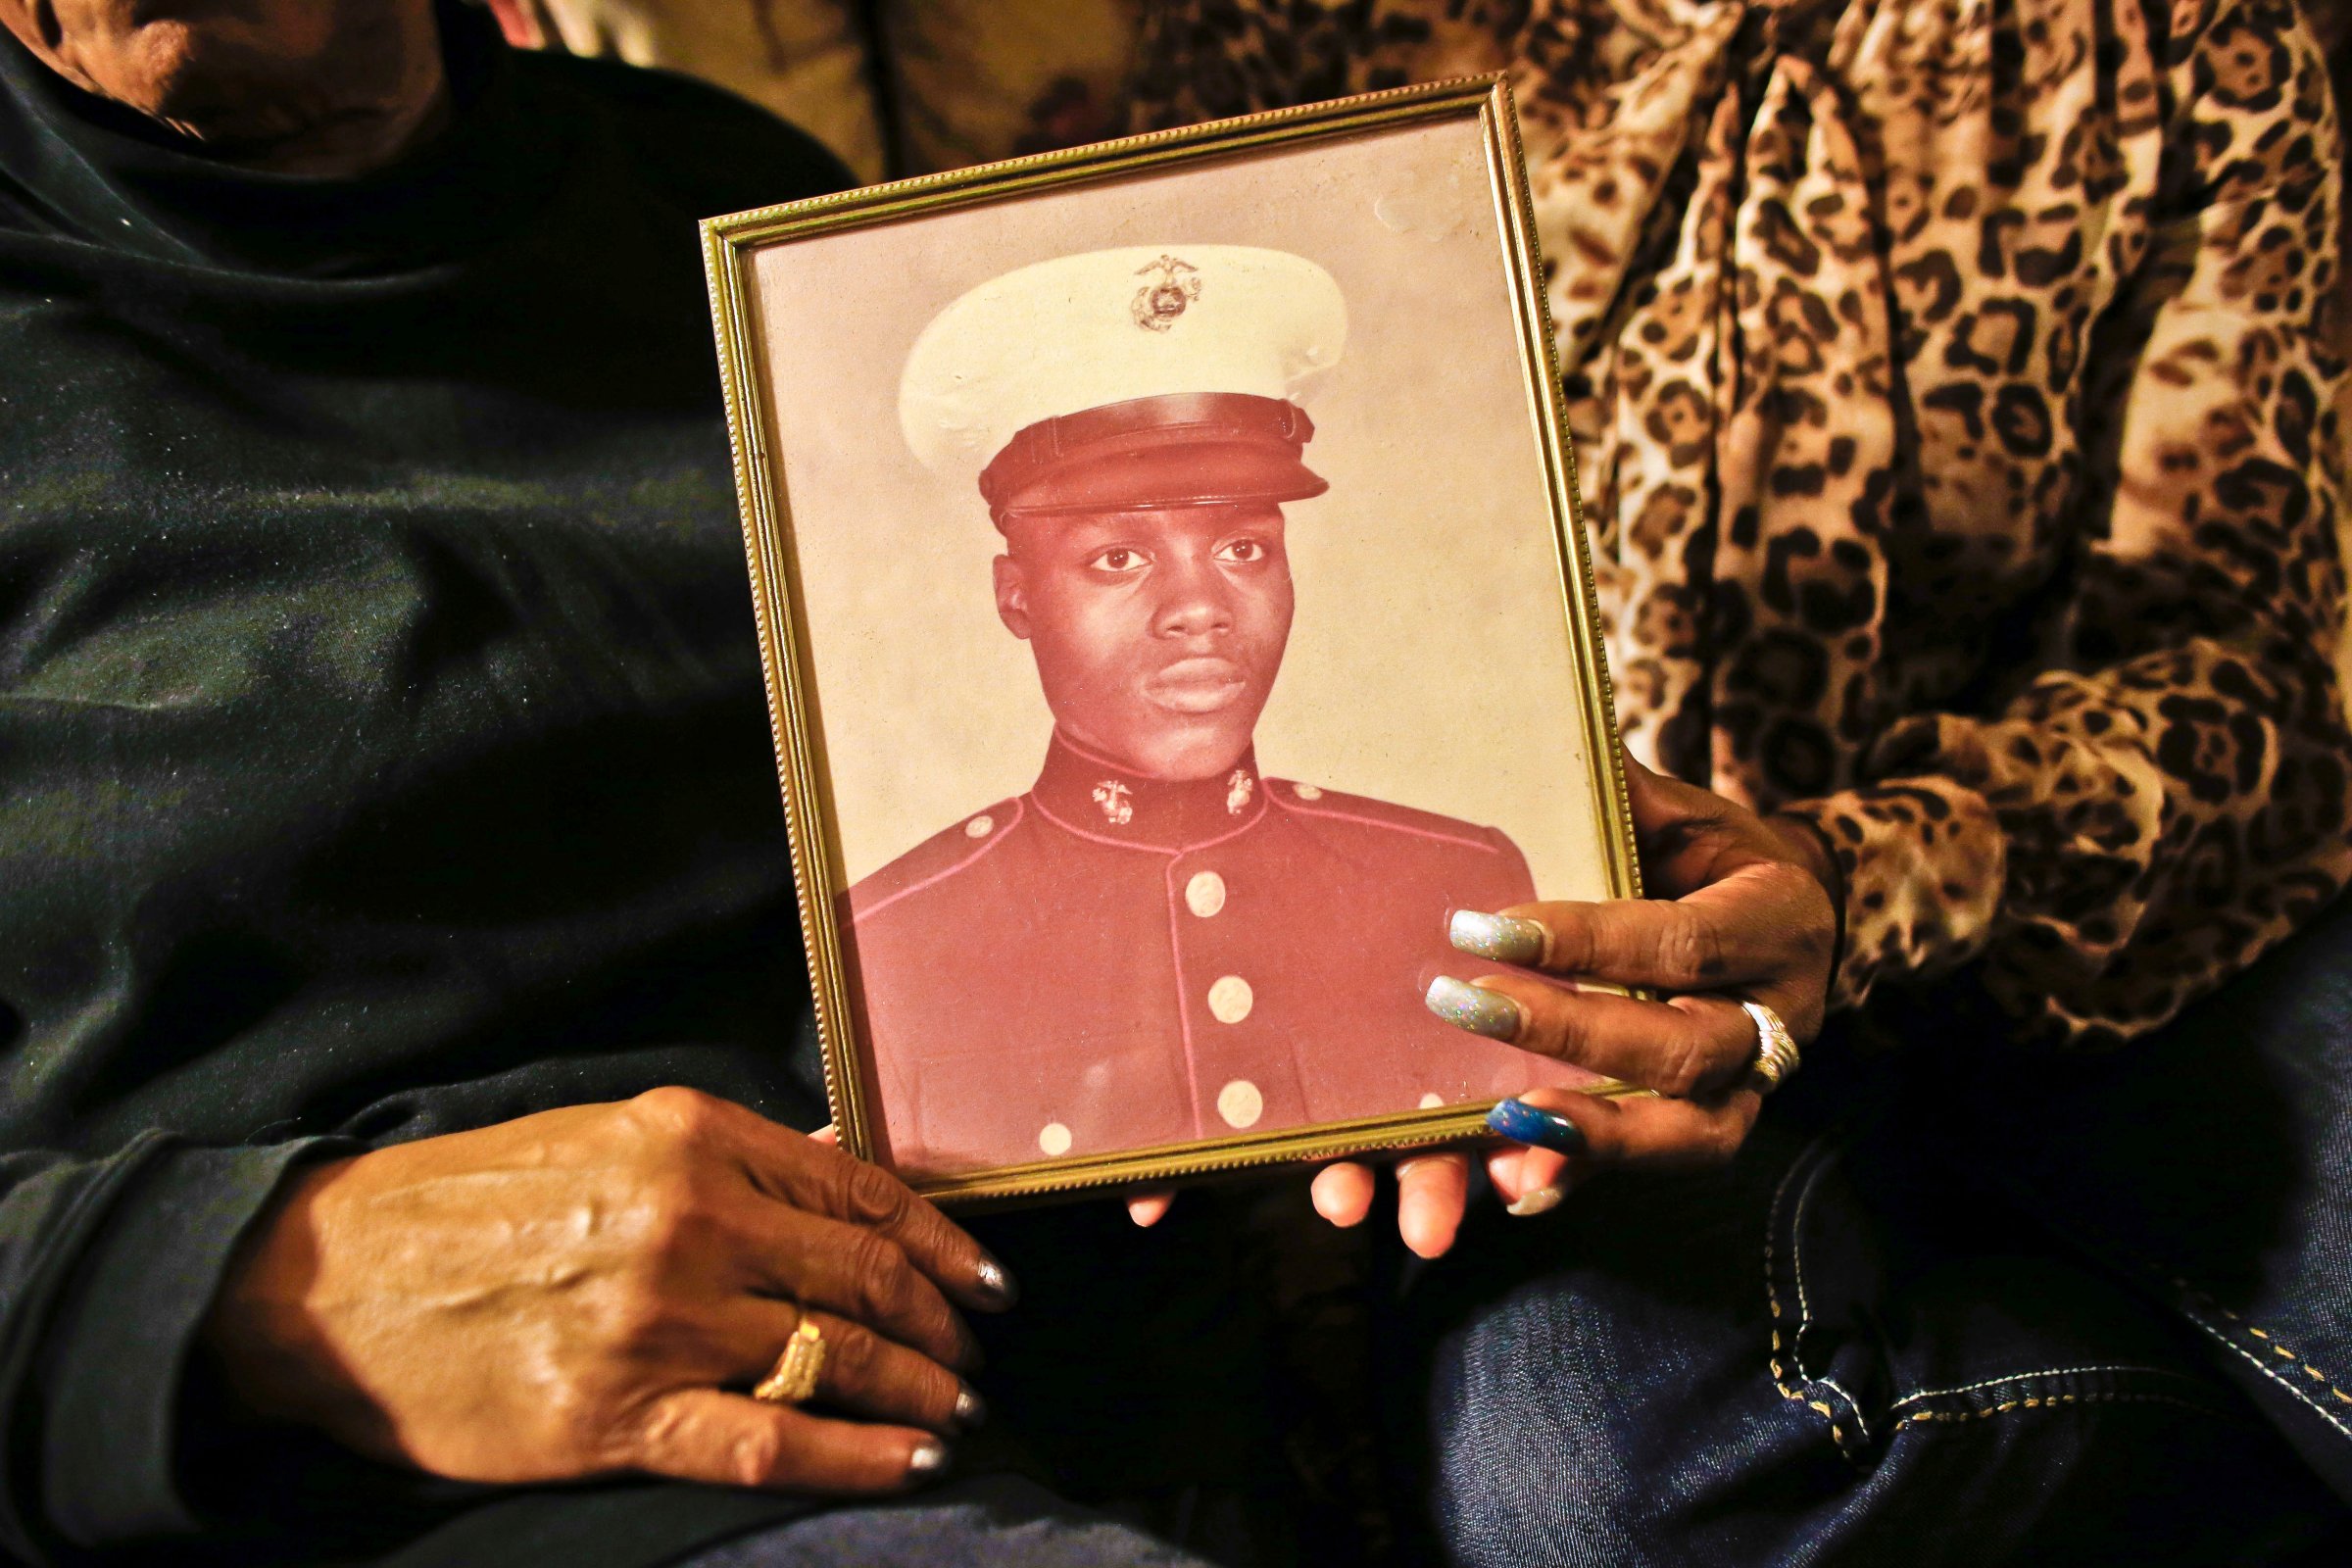 A picture of Jerome Murdough, a former homeless Marine who died in a mental observation unit on Rikers Island jail on Feb. 15, 2014 is held by his mother Alma Murdough left, and sister Cheryl Warner at Alma Murdough's home in the Queens borough of New York.